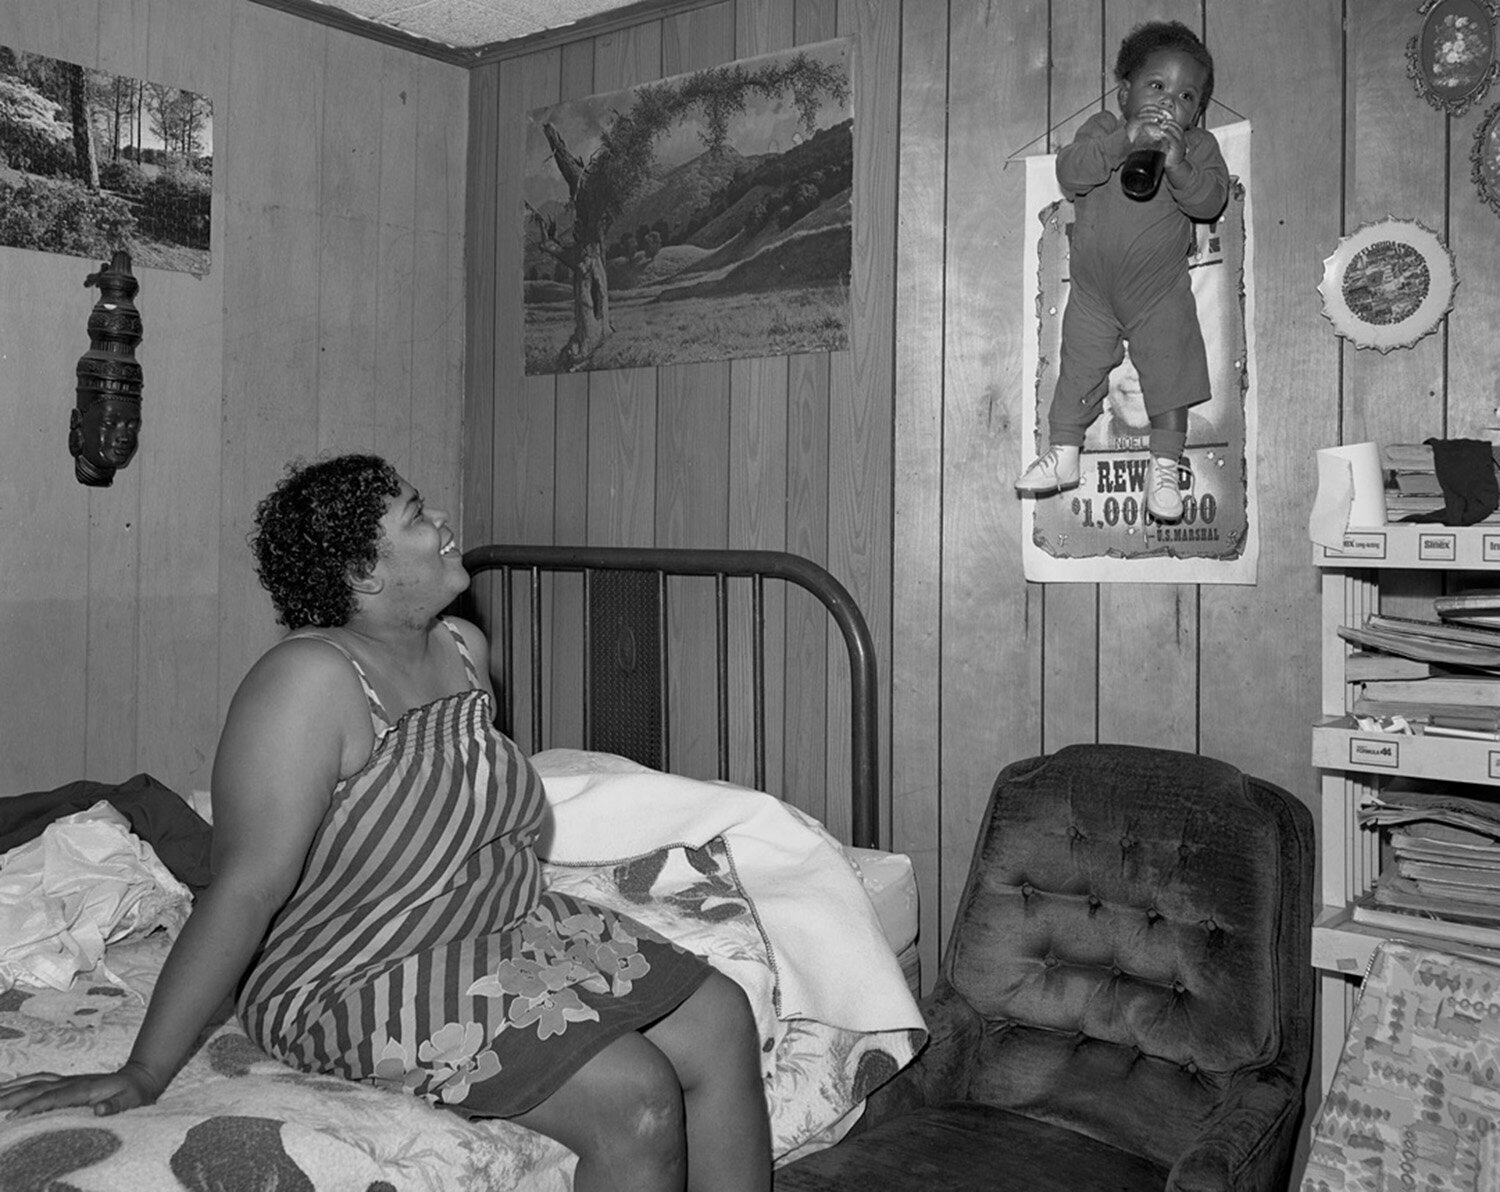   Baby on Wall, Rosedale, MS , 1986 Archival pigment print  15 × 19 in. (image size) The Do Good Fund, Inc., 2016-31 